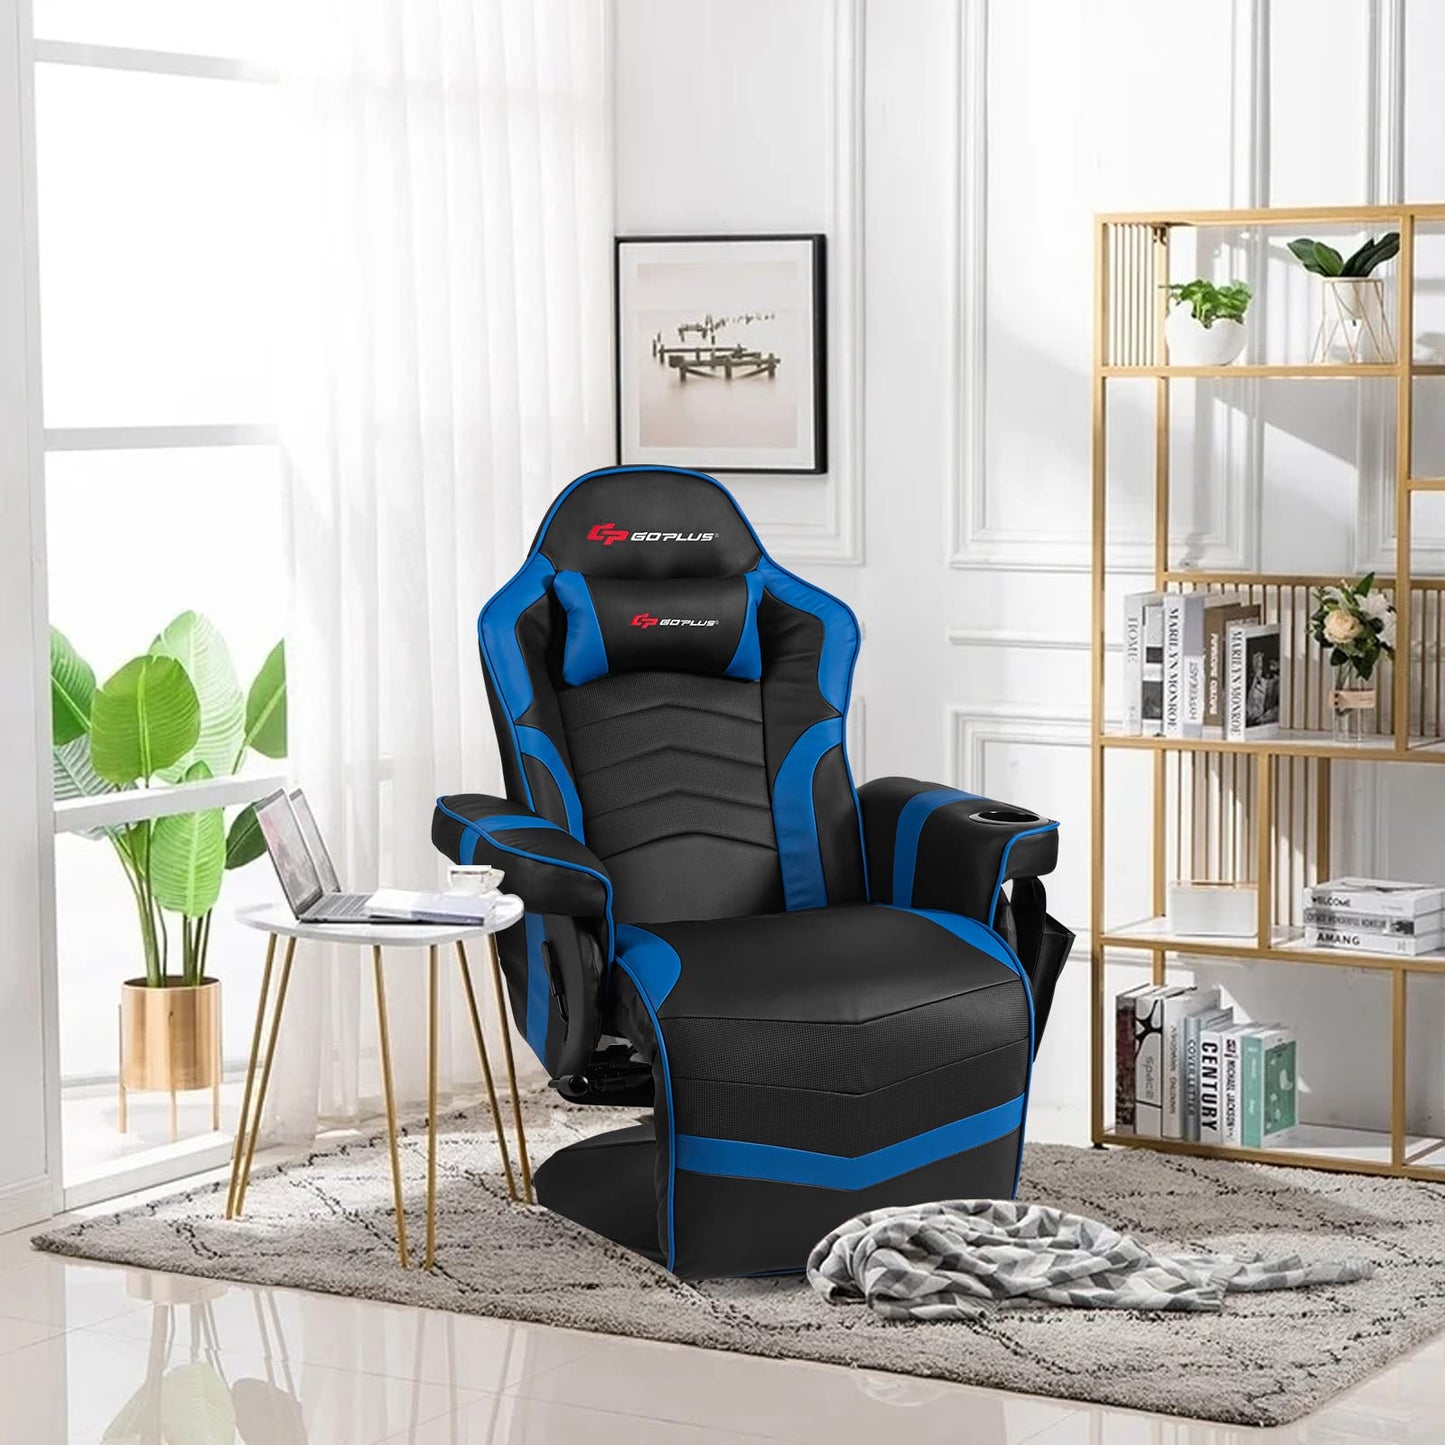 POWERSTONE Gaming Recliner Massage Gaming Chair with Footrest Ergonomic PU Leather Single Sofa with Cup Holder Headrest and Side Pouch, Adjustable Living Room Chair Seating, Navy Blue - Game-Savvy